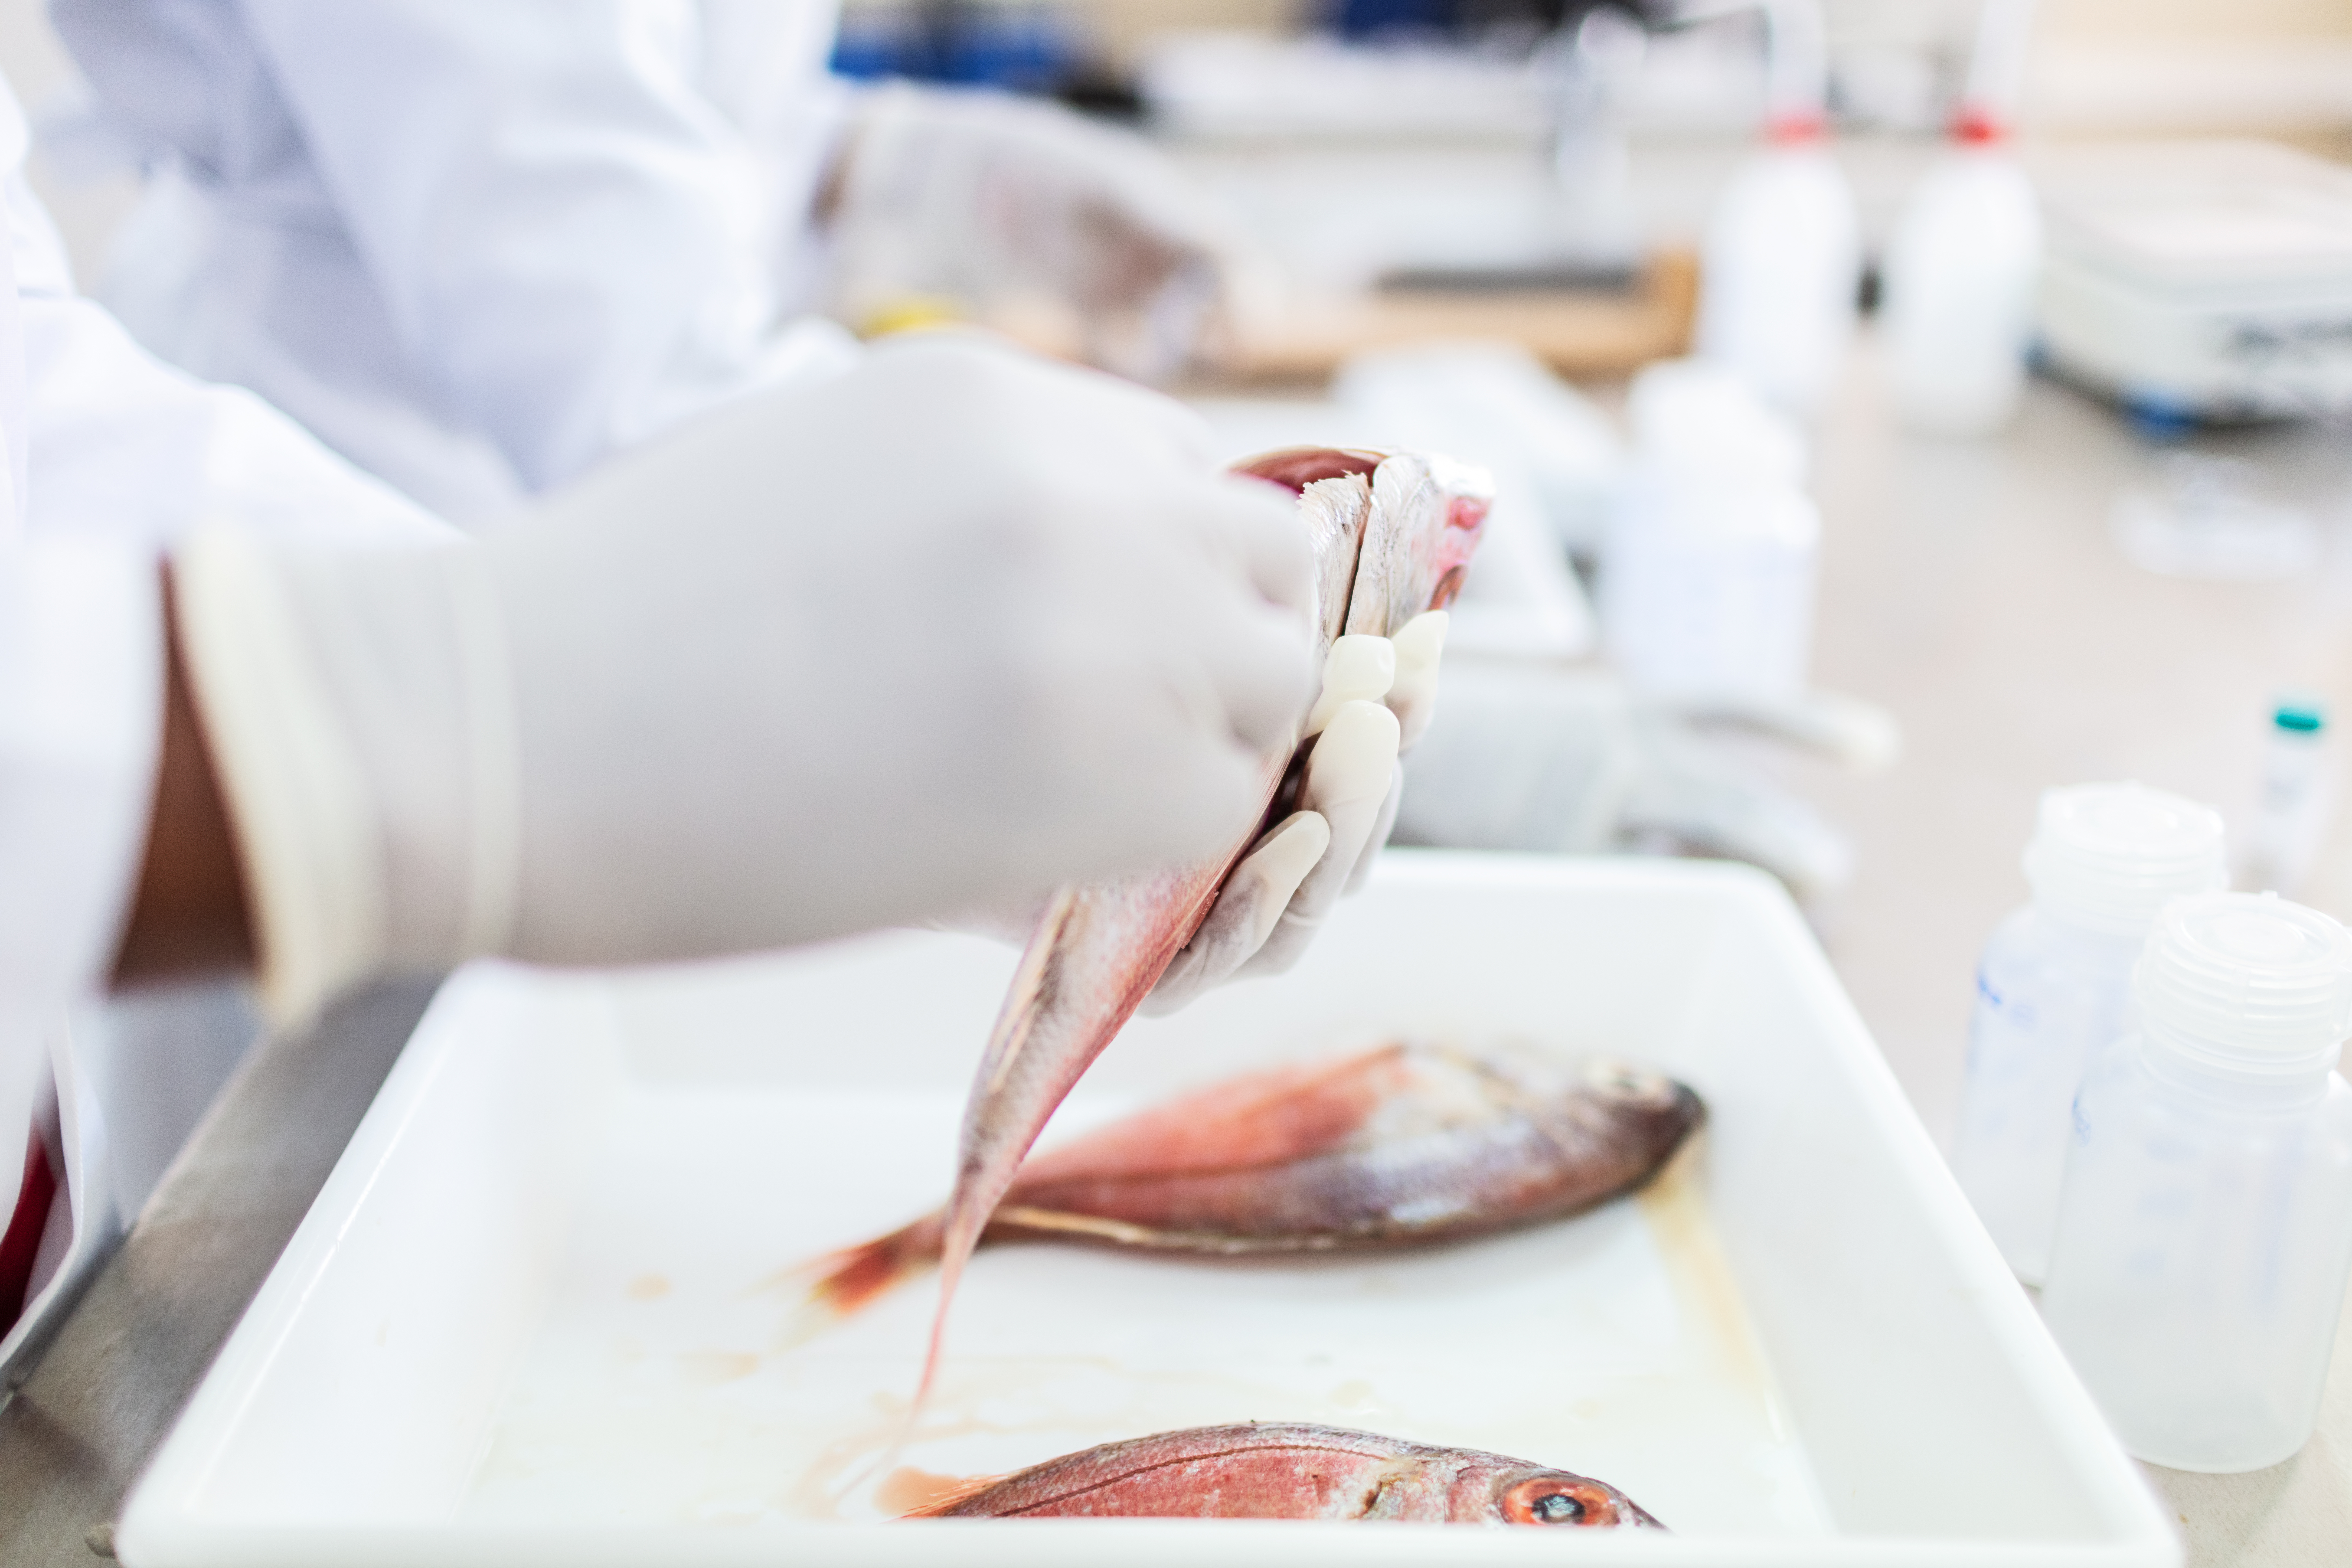 researcher in a lab examining fish